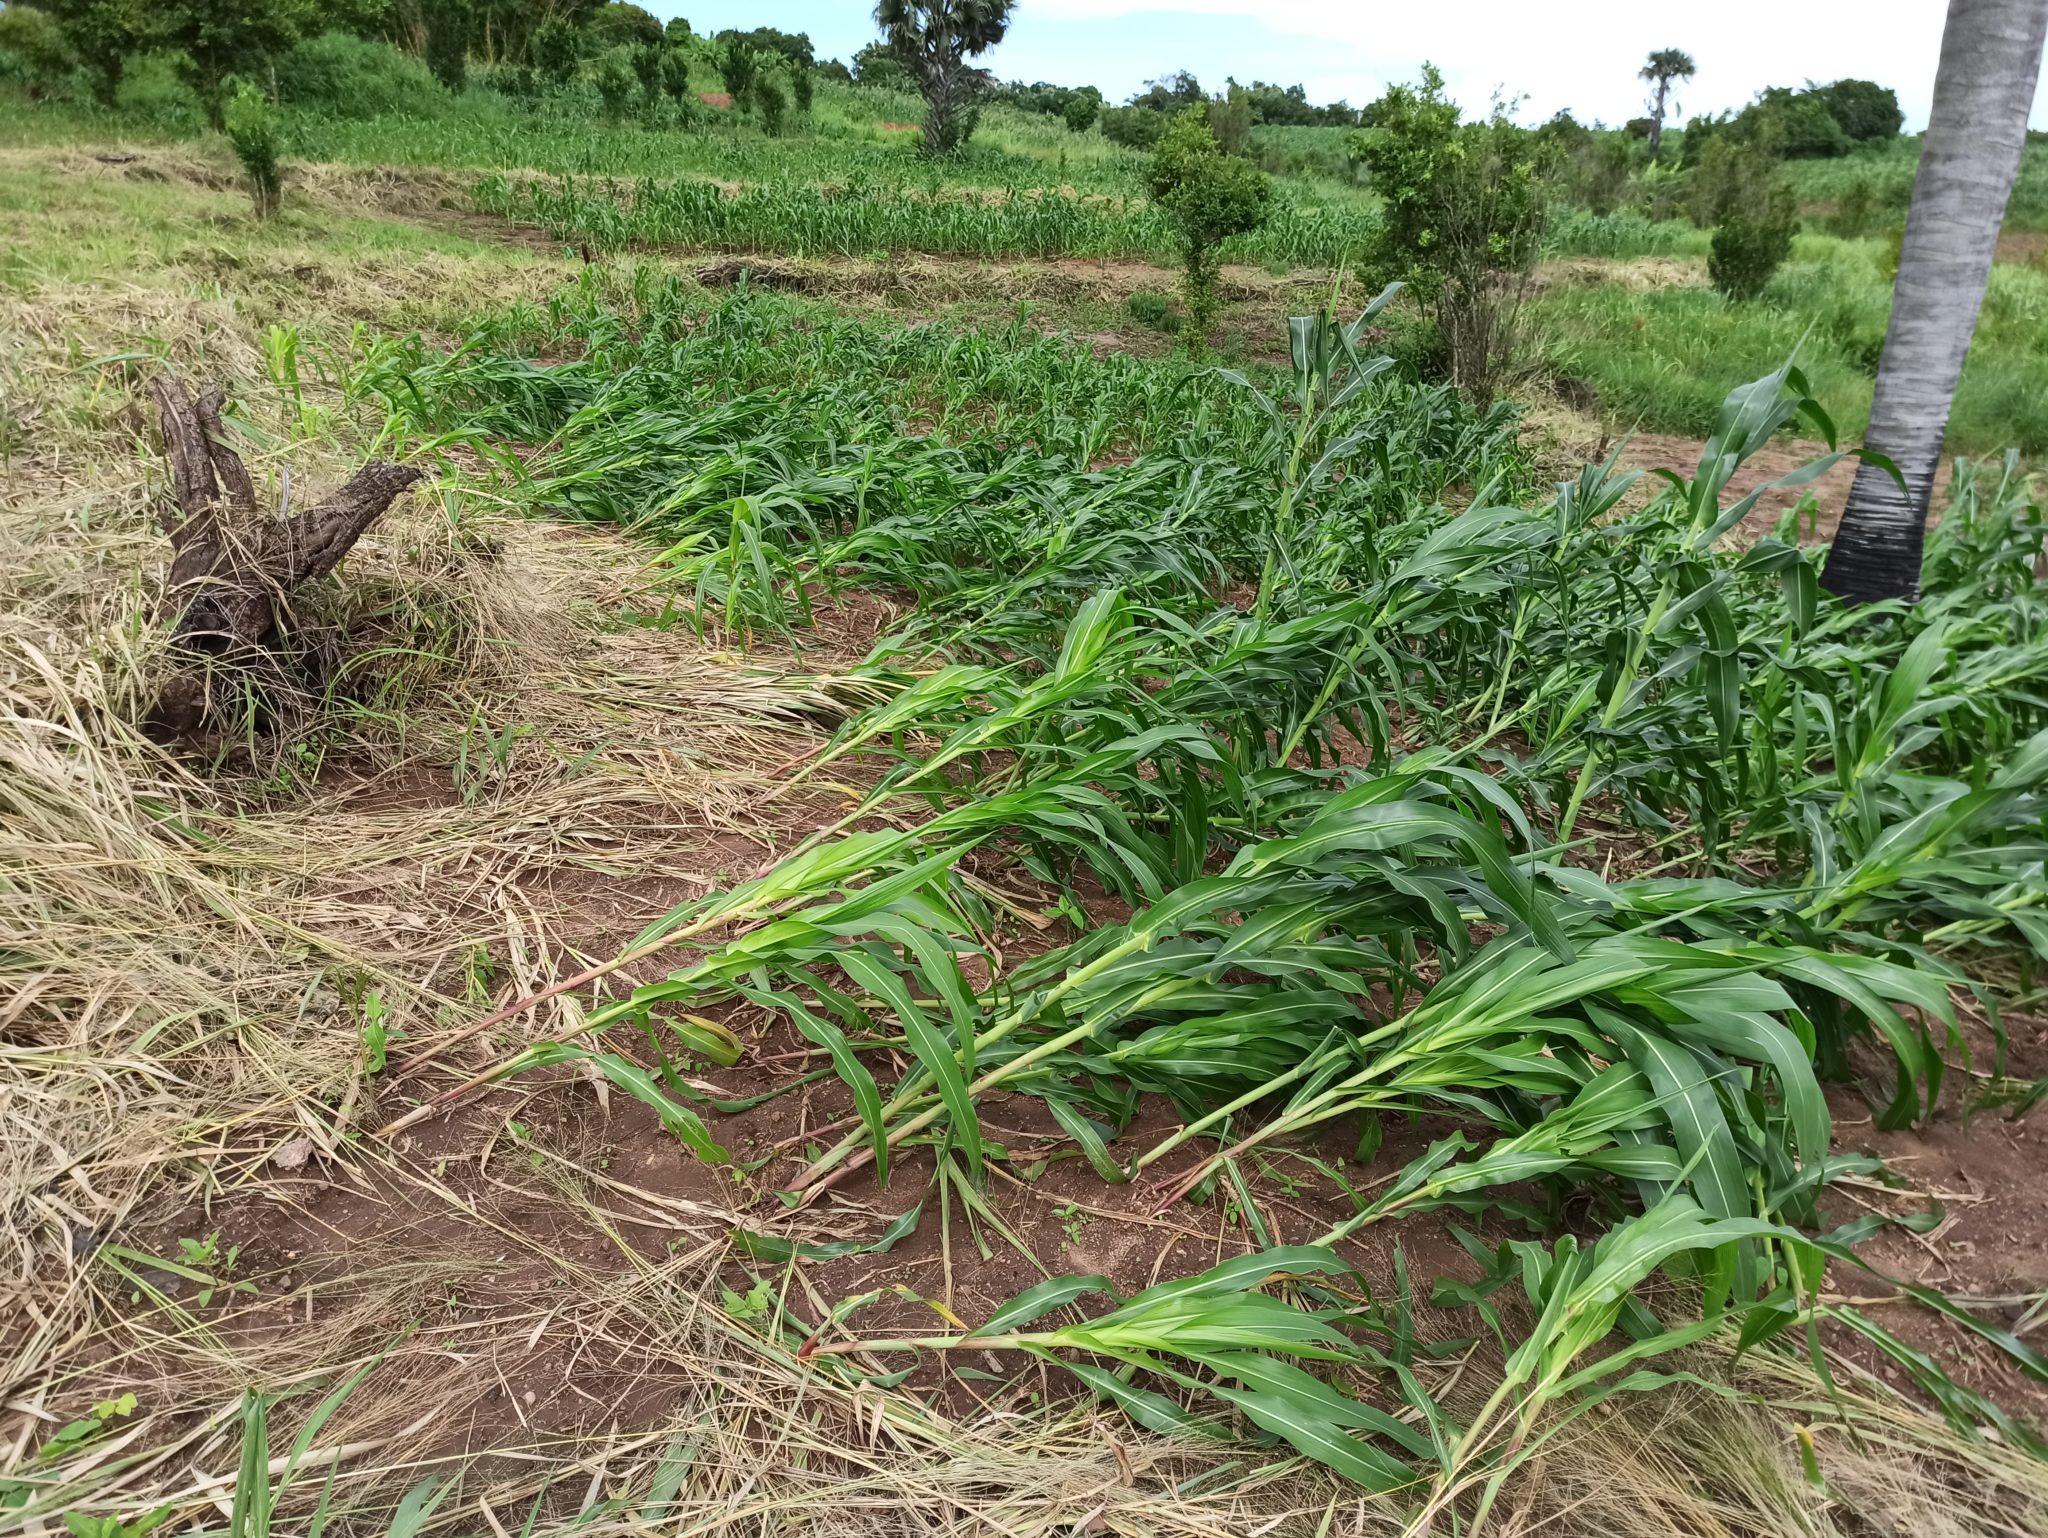 A field of crops is bent over, blown down by the winds of Cyclone Idai